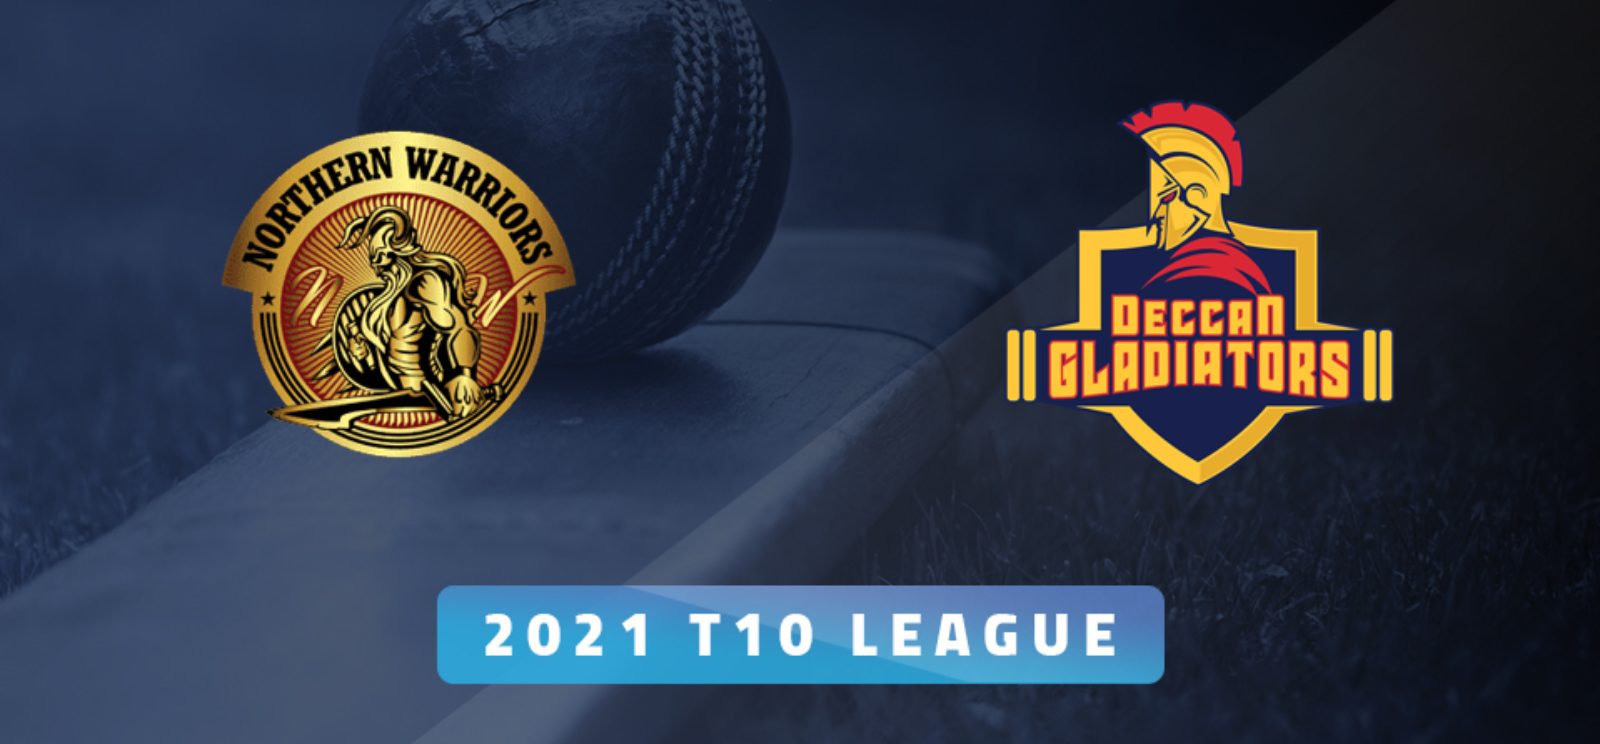 Abu Dhabi T10 LIVE: Preview, Squad News, Head to Head stats and Dream11 Prediction for Northern Warriors vs Deccan Gladiators - Match 11